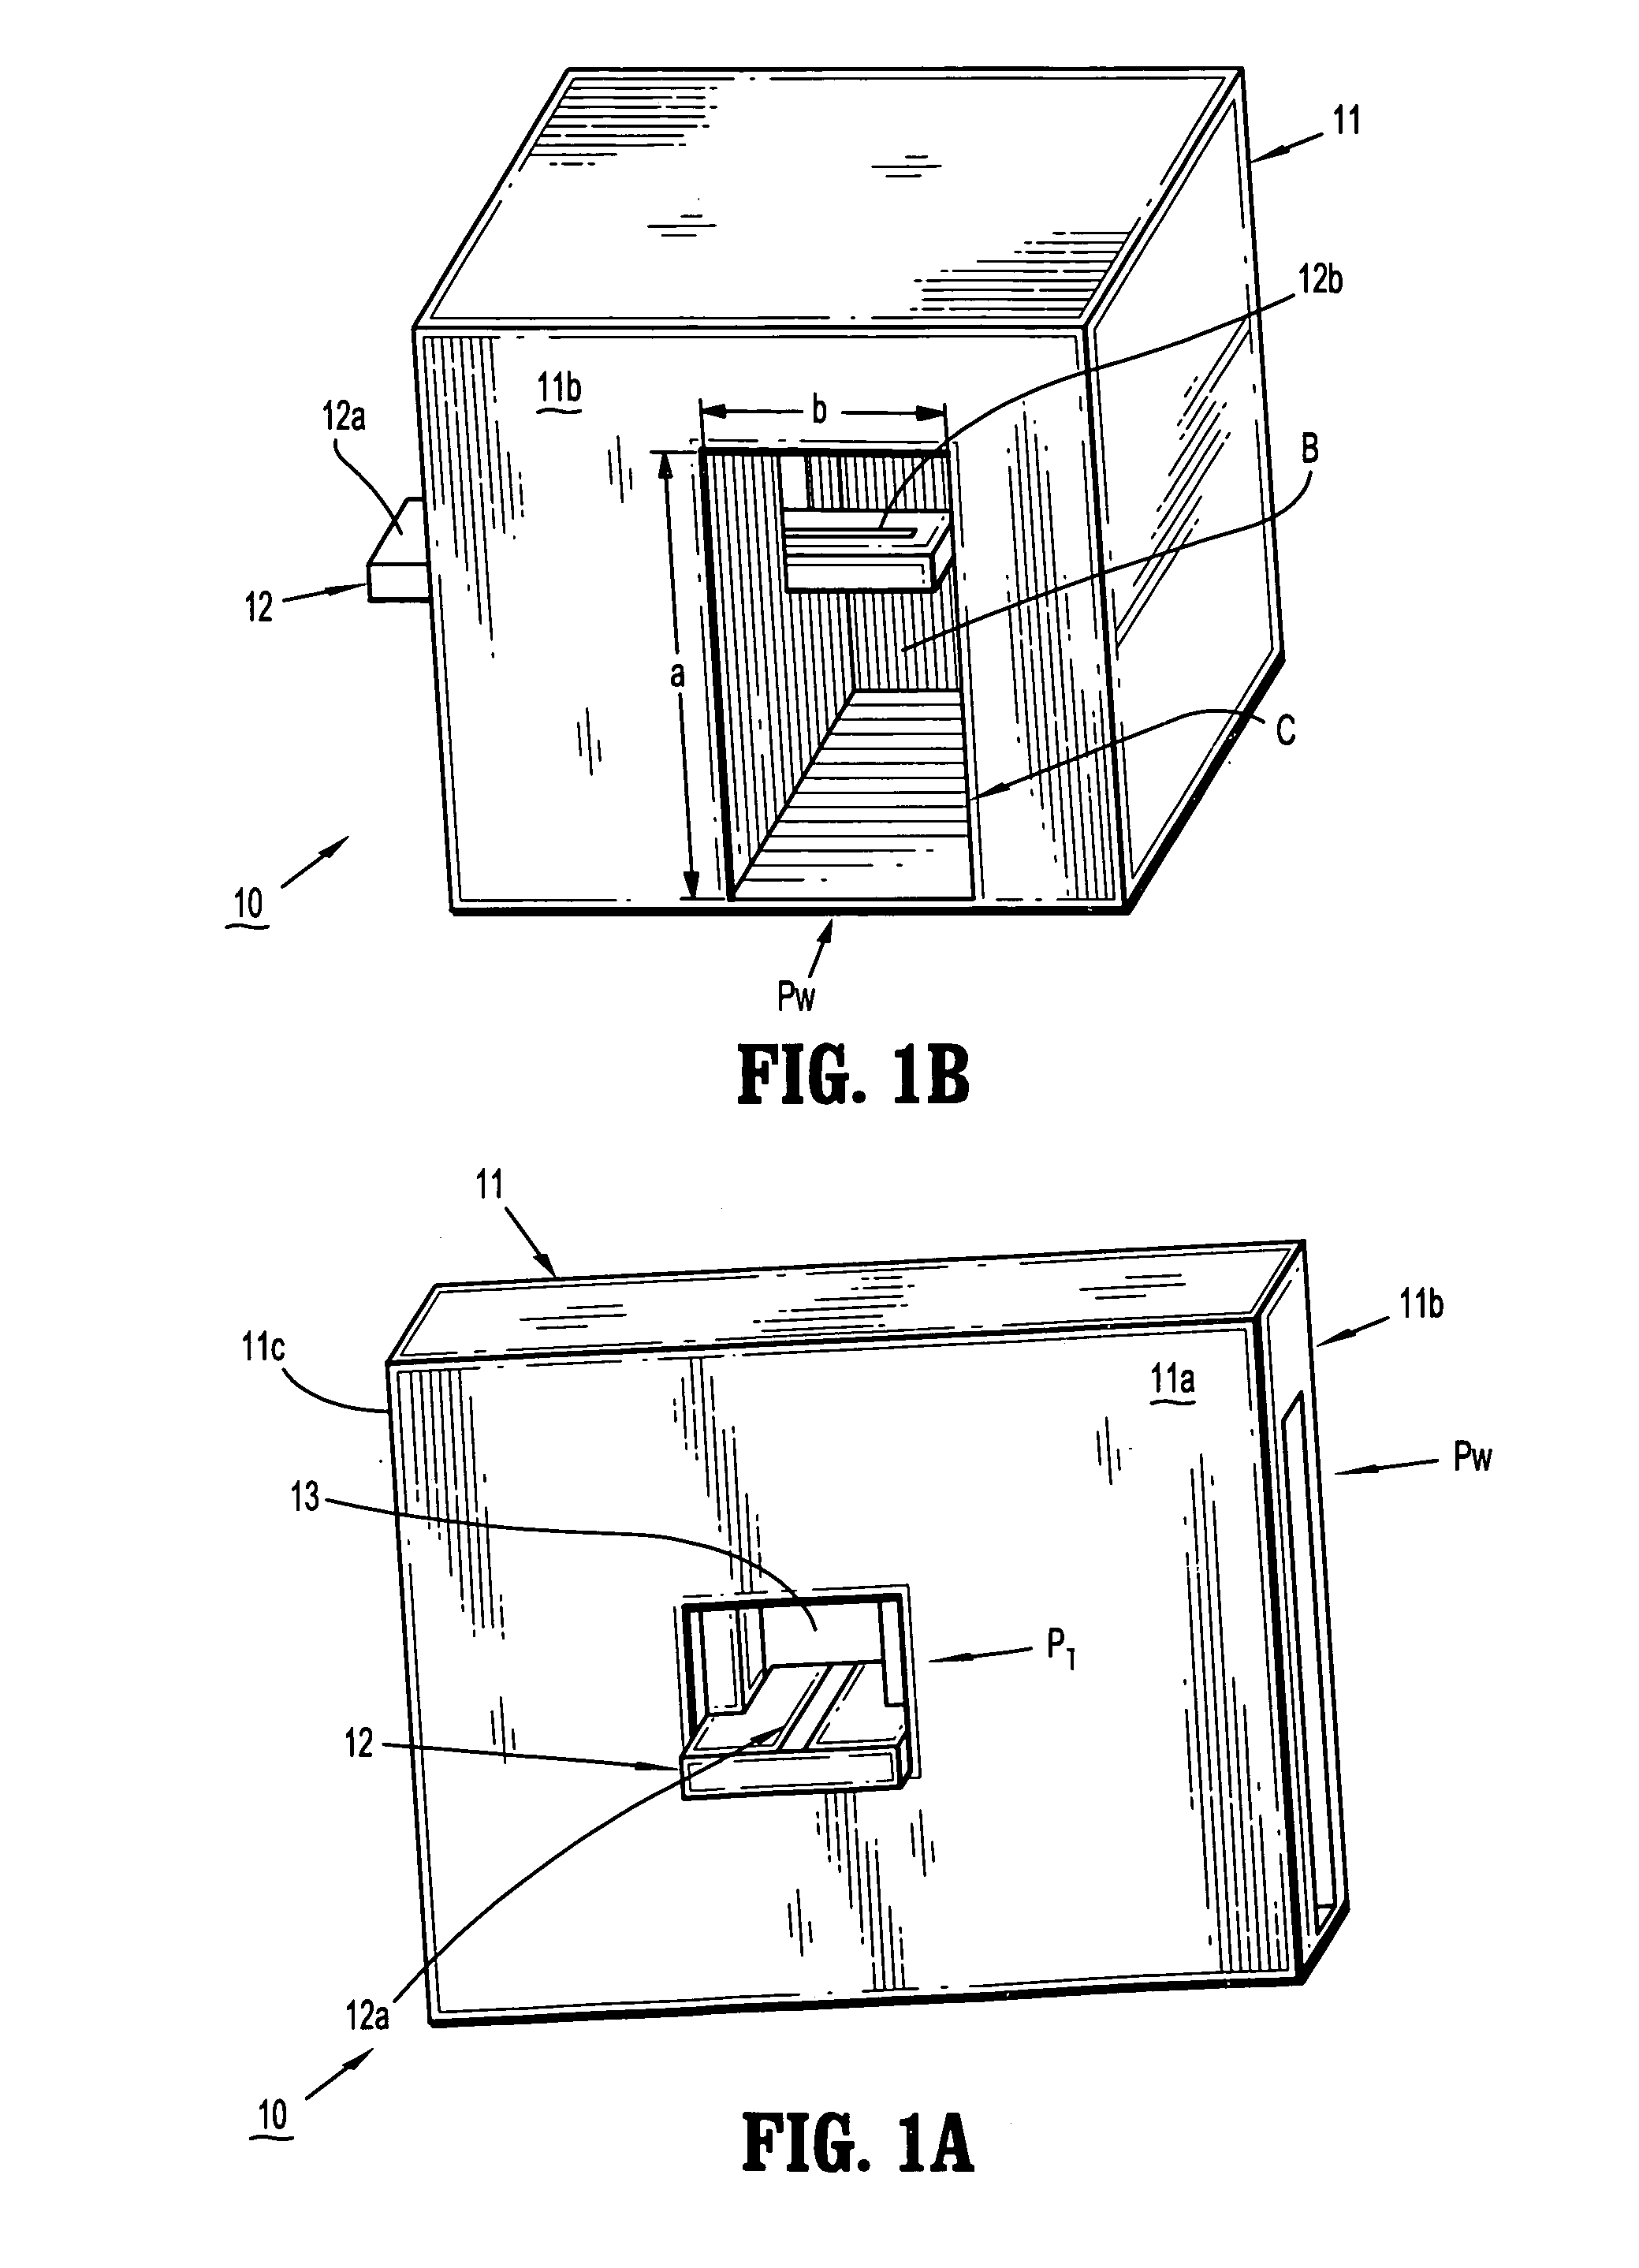 Apparatus and methods for constructing and packaging waveguide to planar transmission line transitions for millimeter wave applications